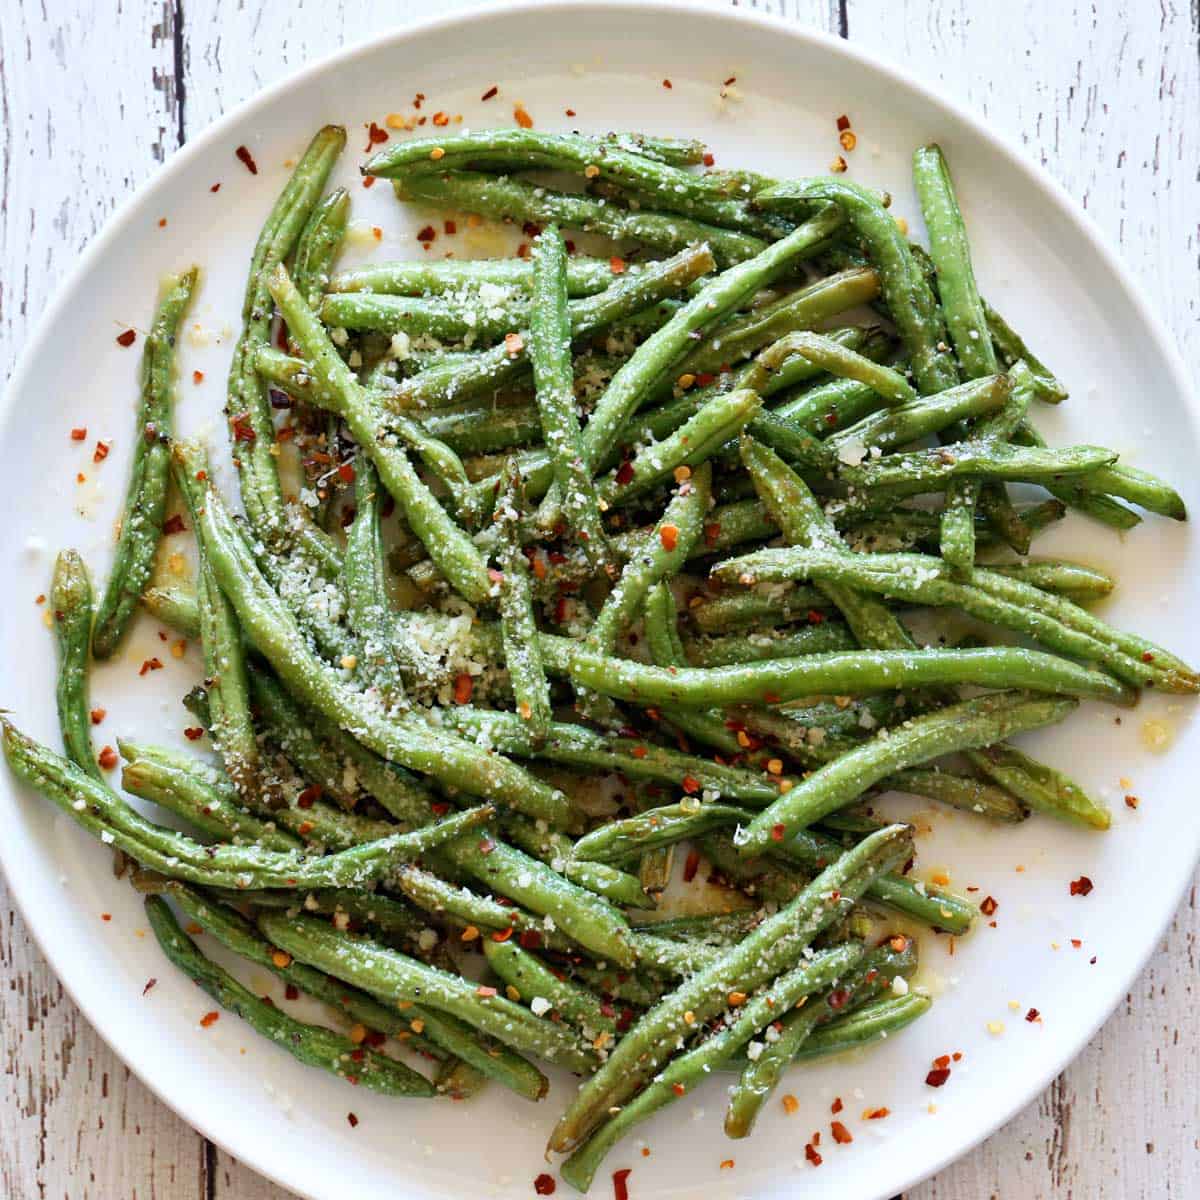 Roasted green beans are topped with parmesan.